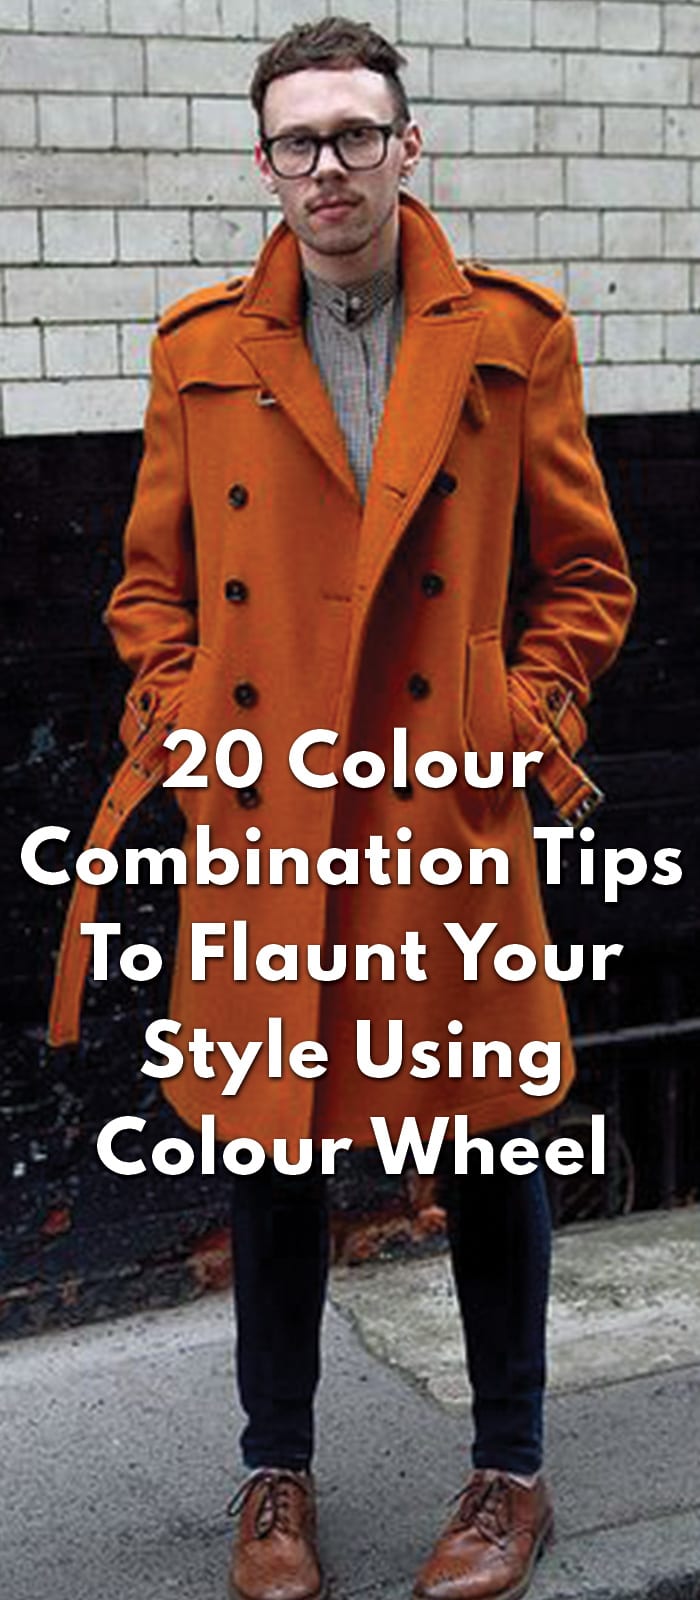 20-Colour-Combination-Tips-To-Flaunt-Your-Style-Using-Colour-Wheel